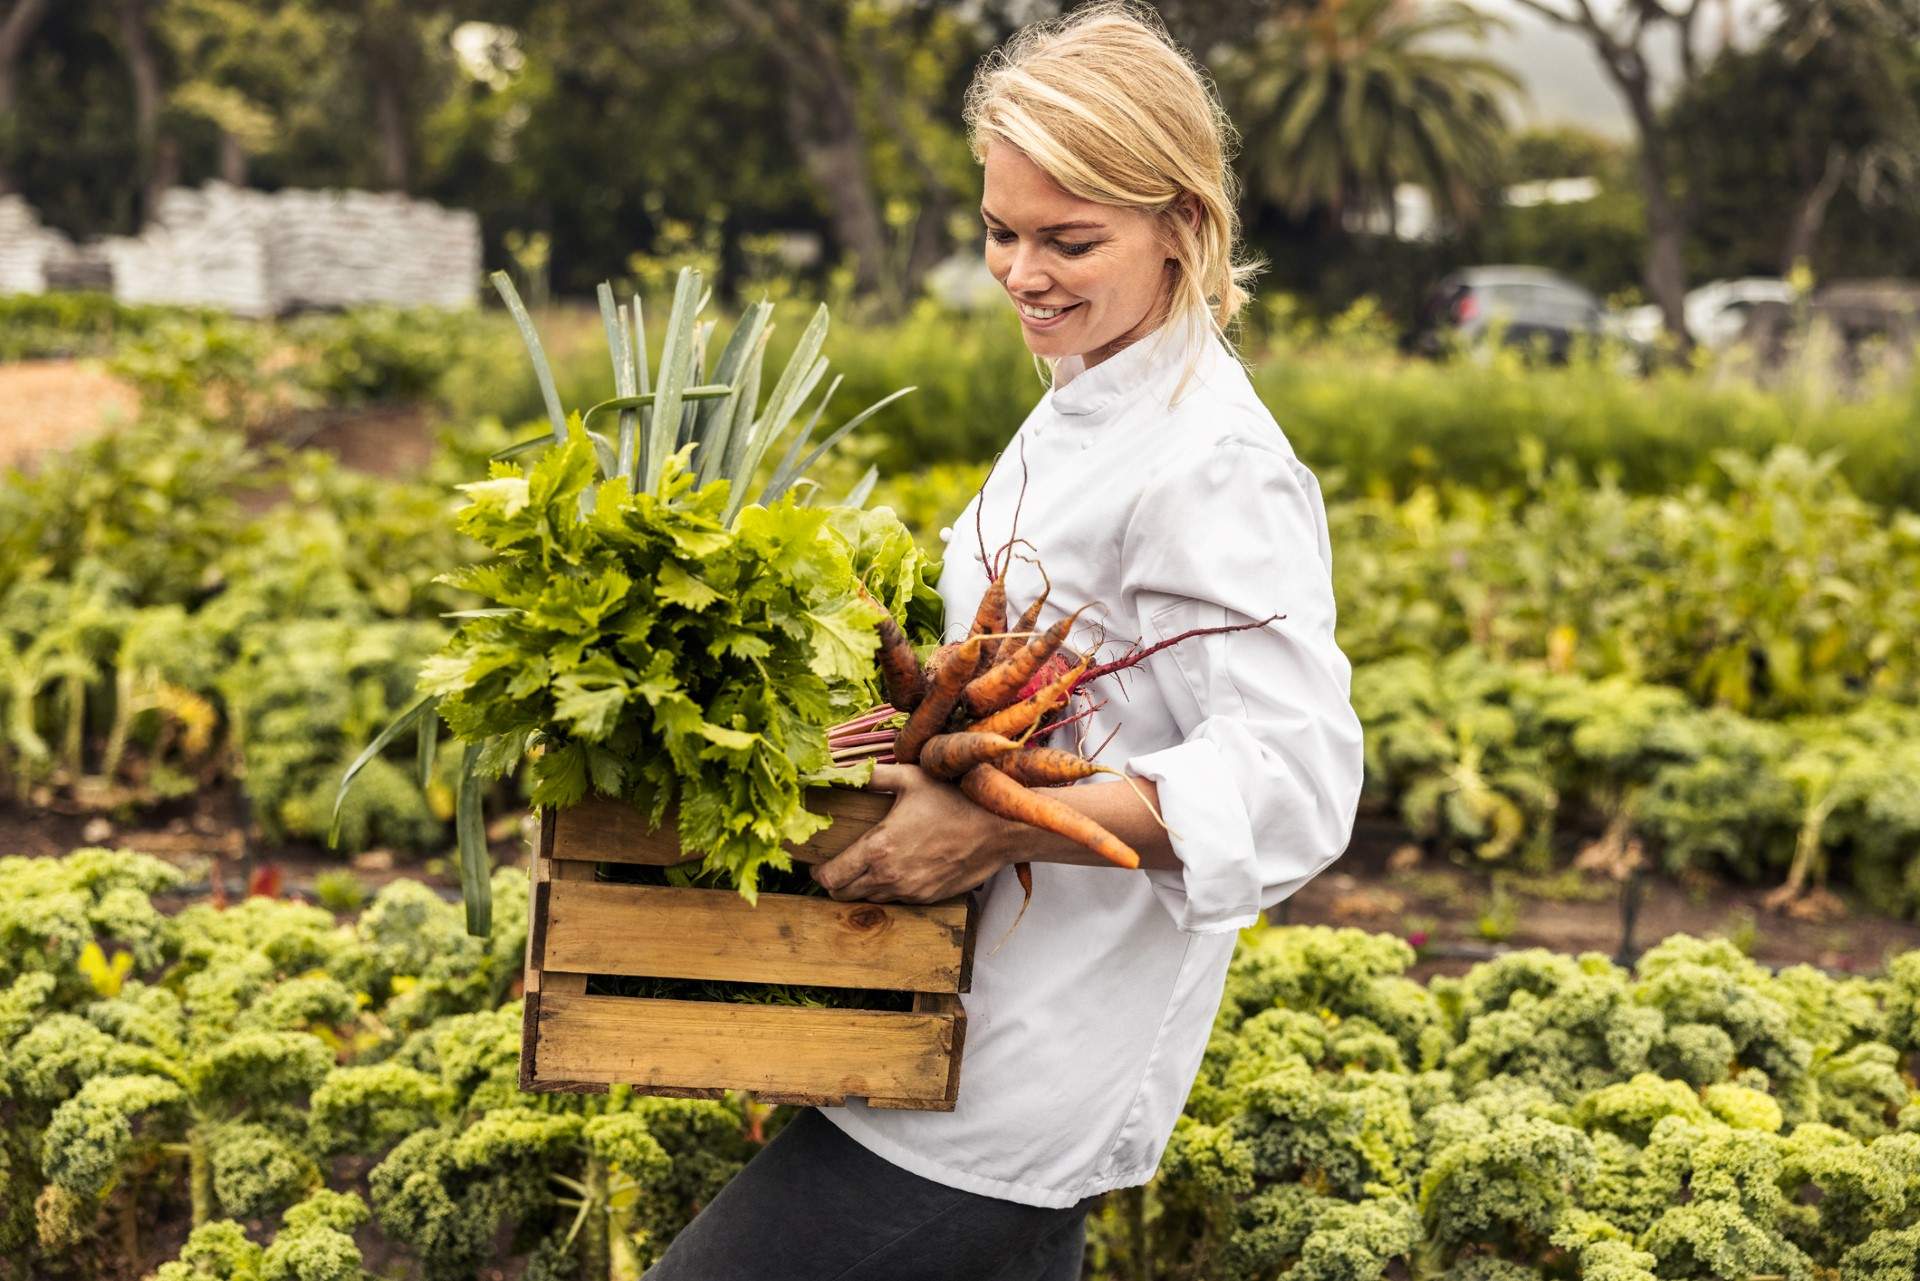 Image depicts a restaurant worker carrying a box of produce through a garden.